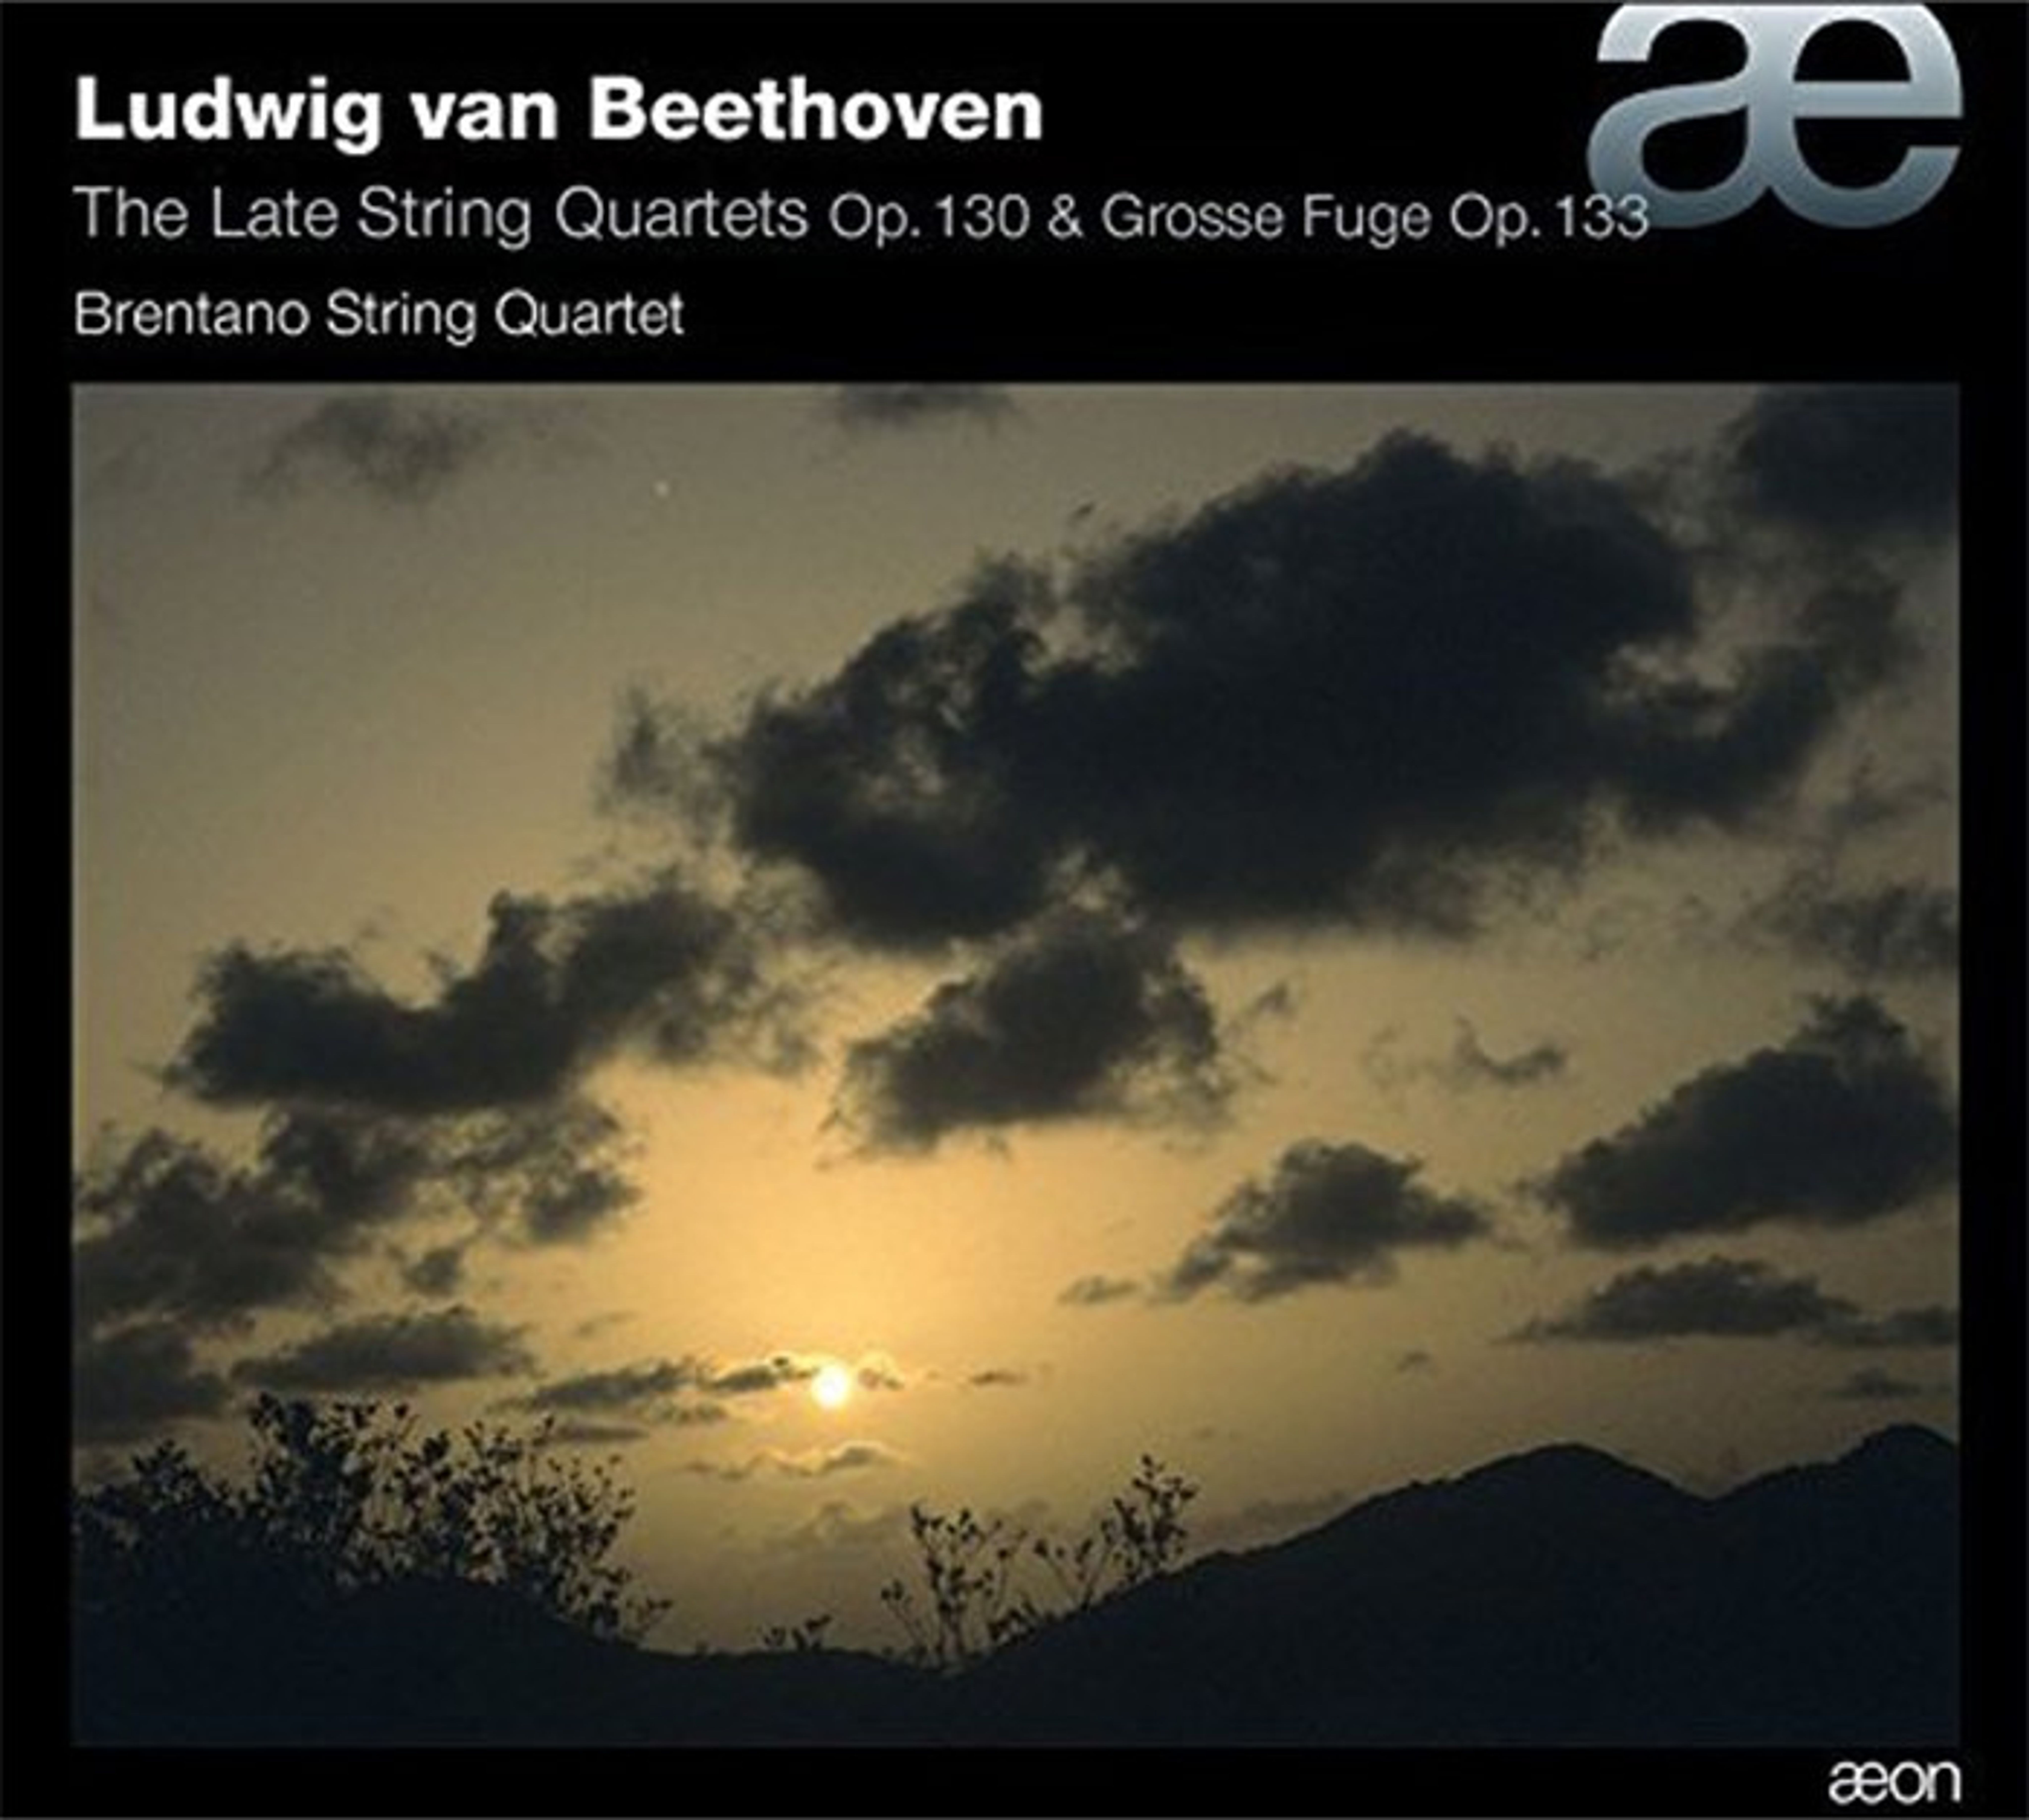 cover image of the recording Beethoven: The Late Quartets op. 130 and 133 “Grosse Fuge”